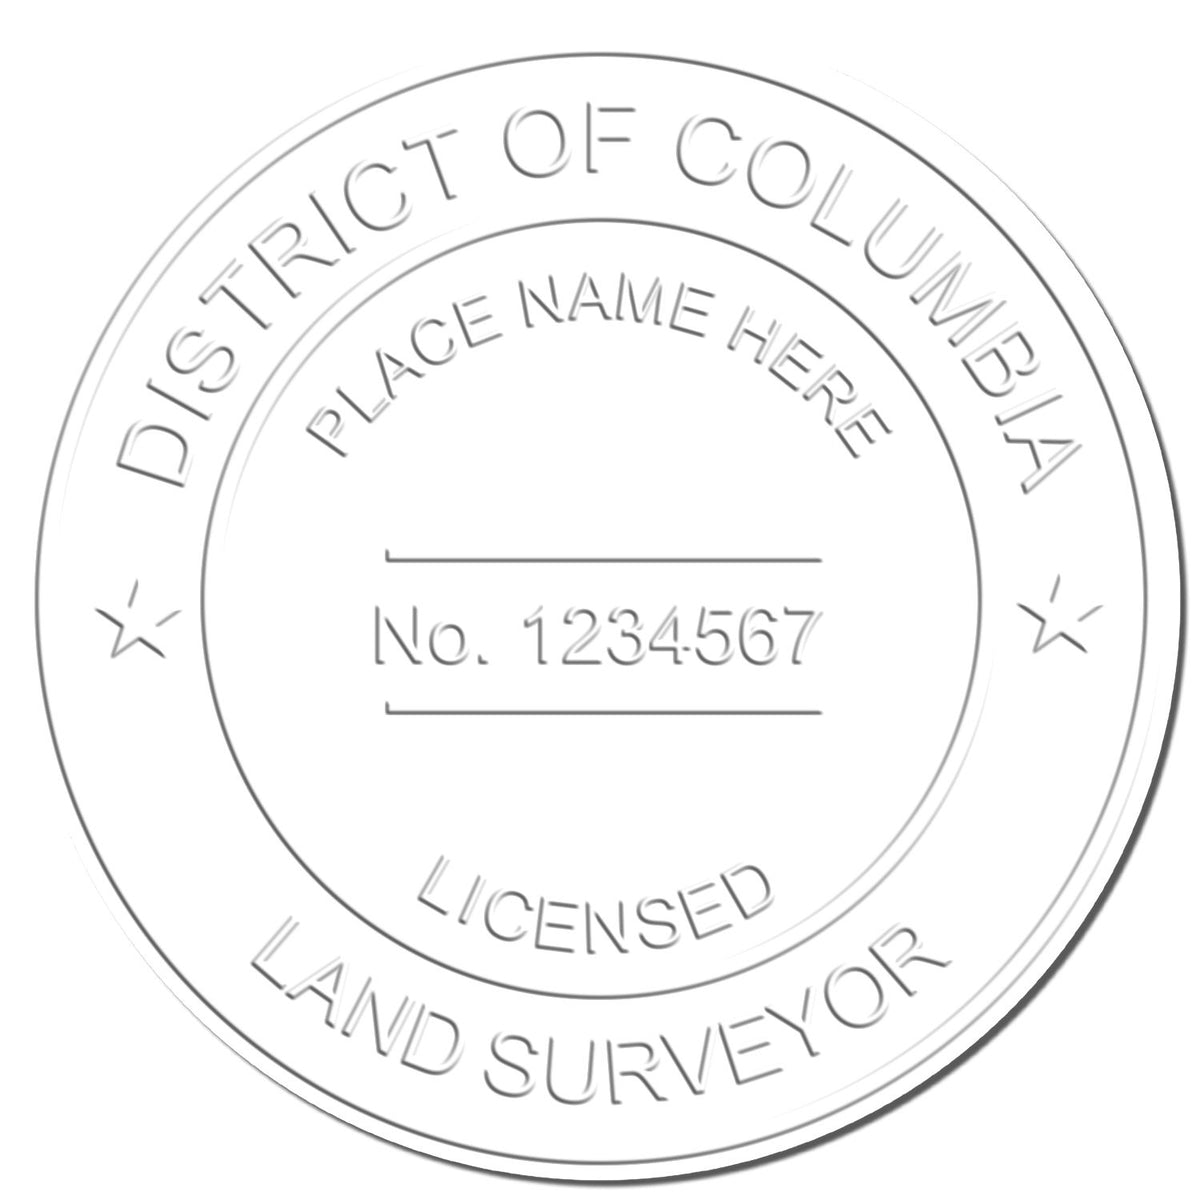 This paper is stamped with a sample imprint of the Gift District of Columbia Land Surveyor Seal, signifying its quality and reliability.